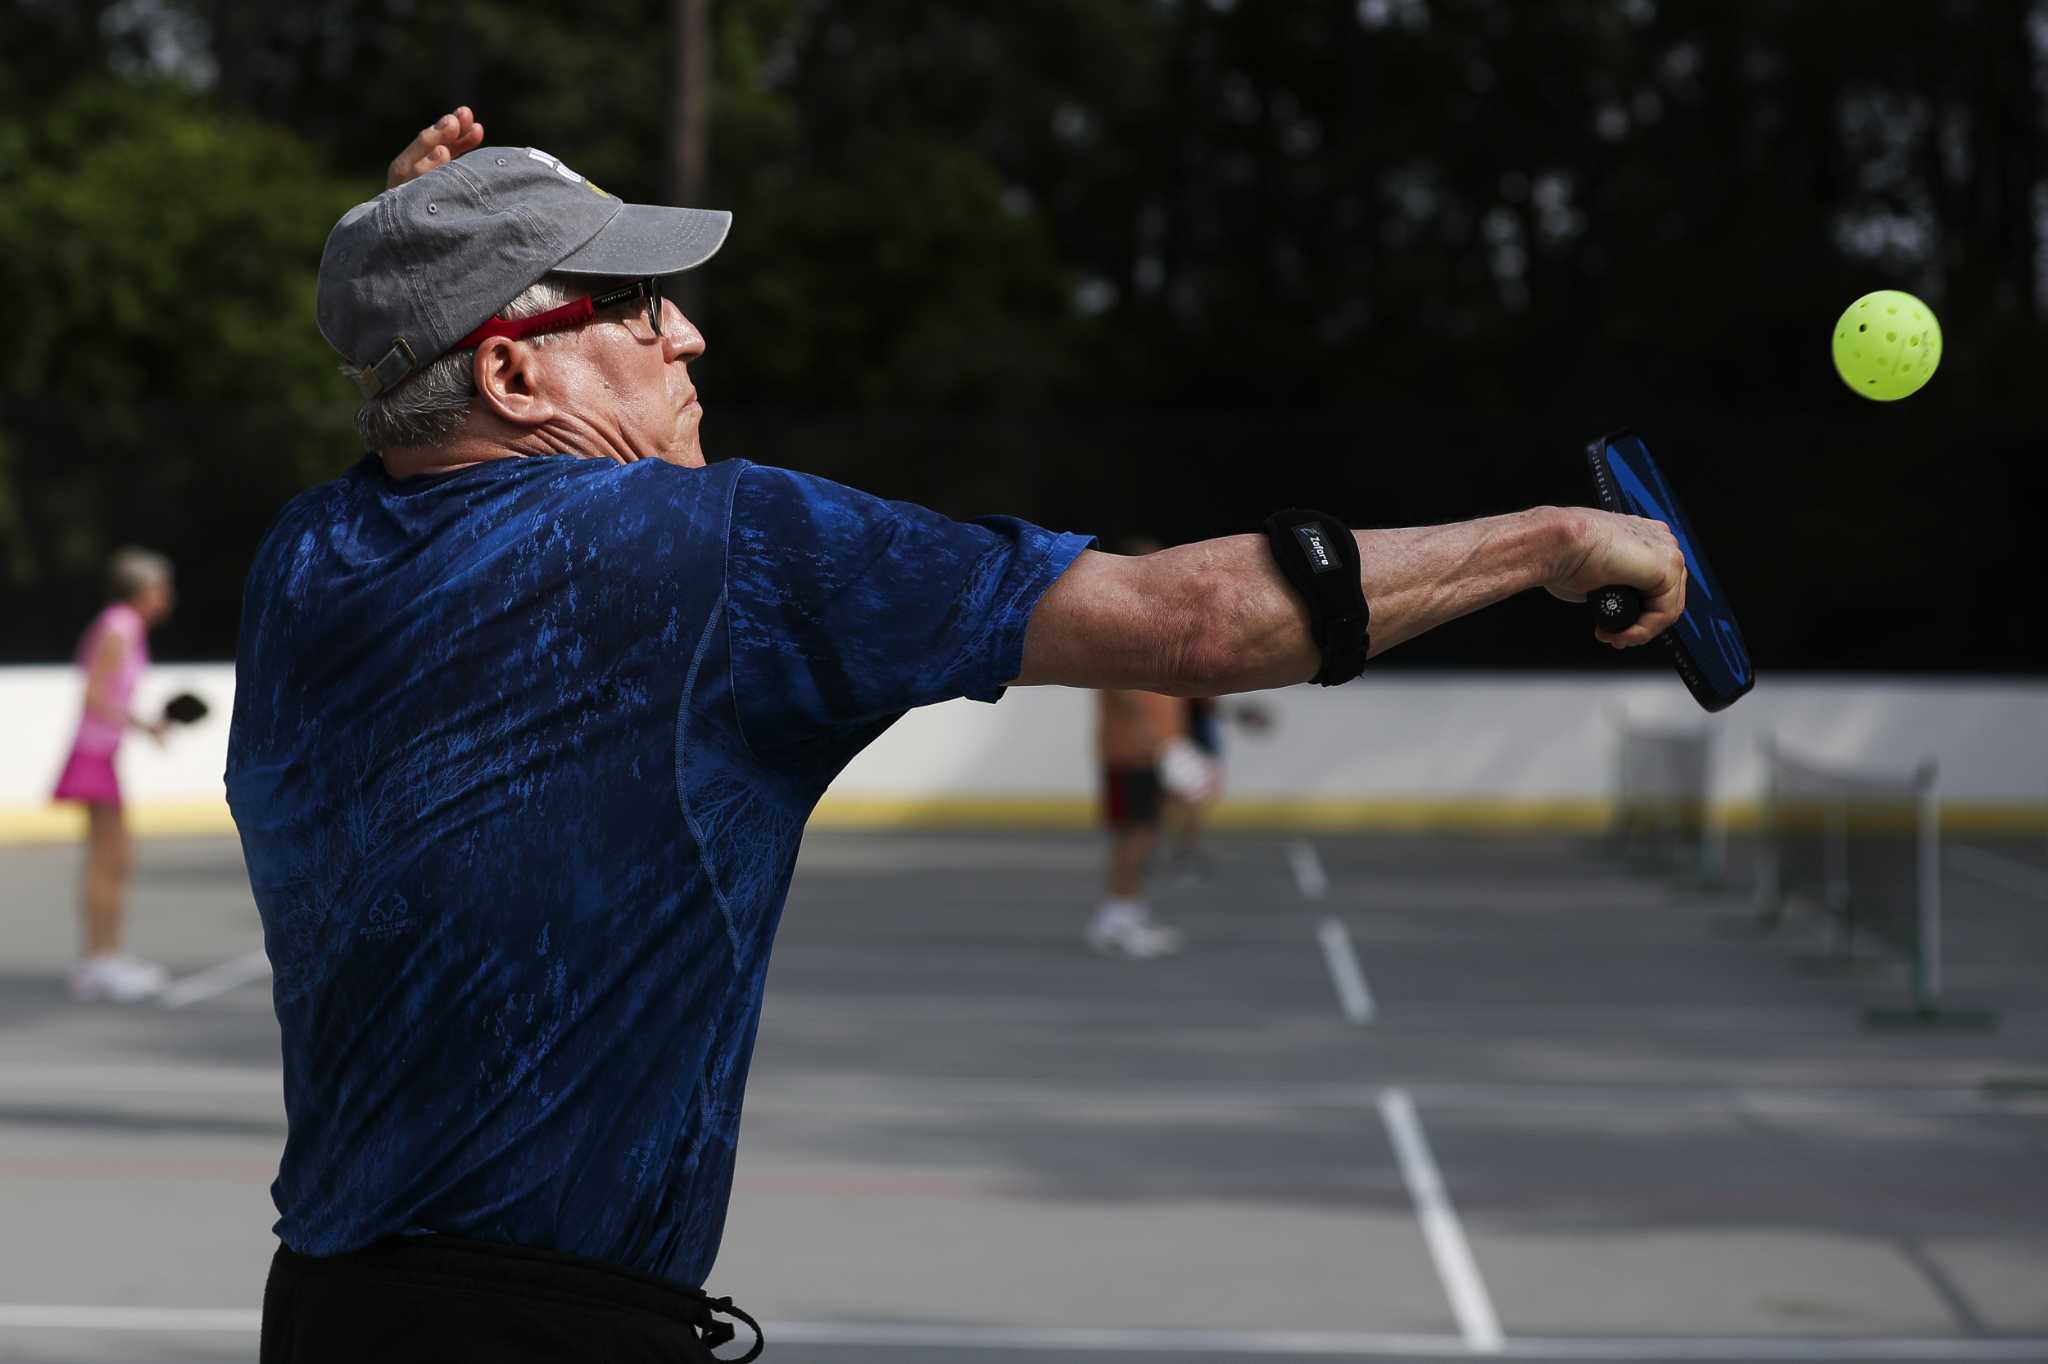 The Woodlands to open major pickleball facility as sport grows